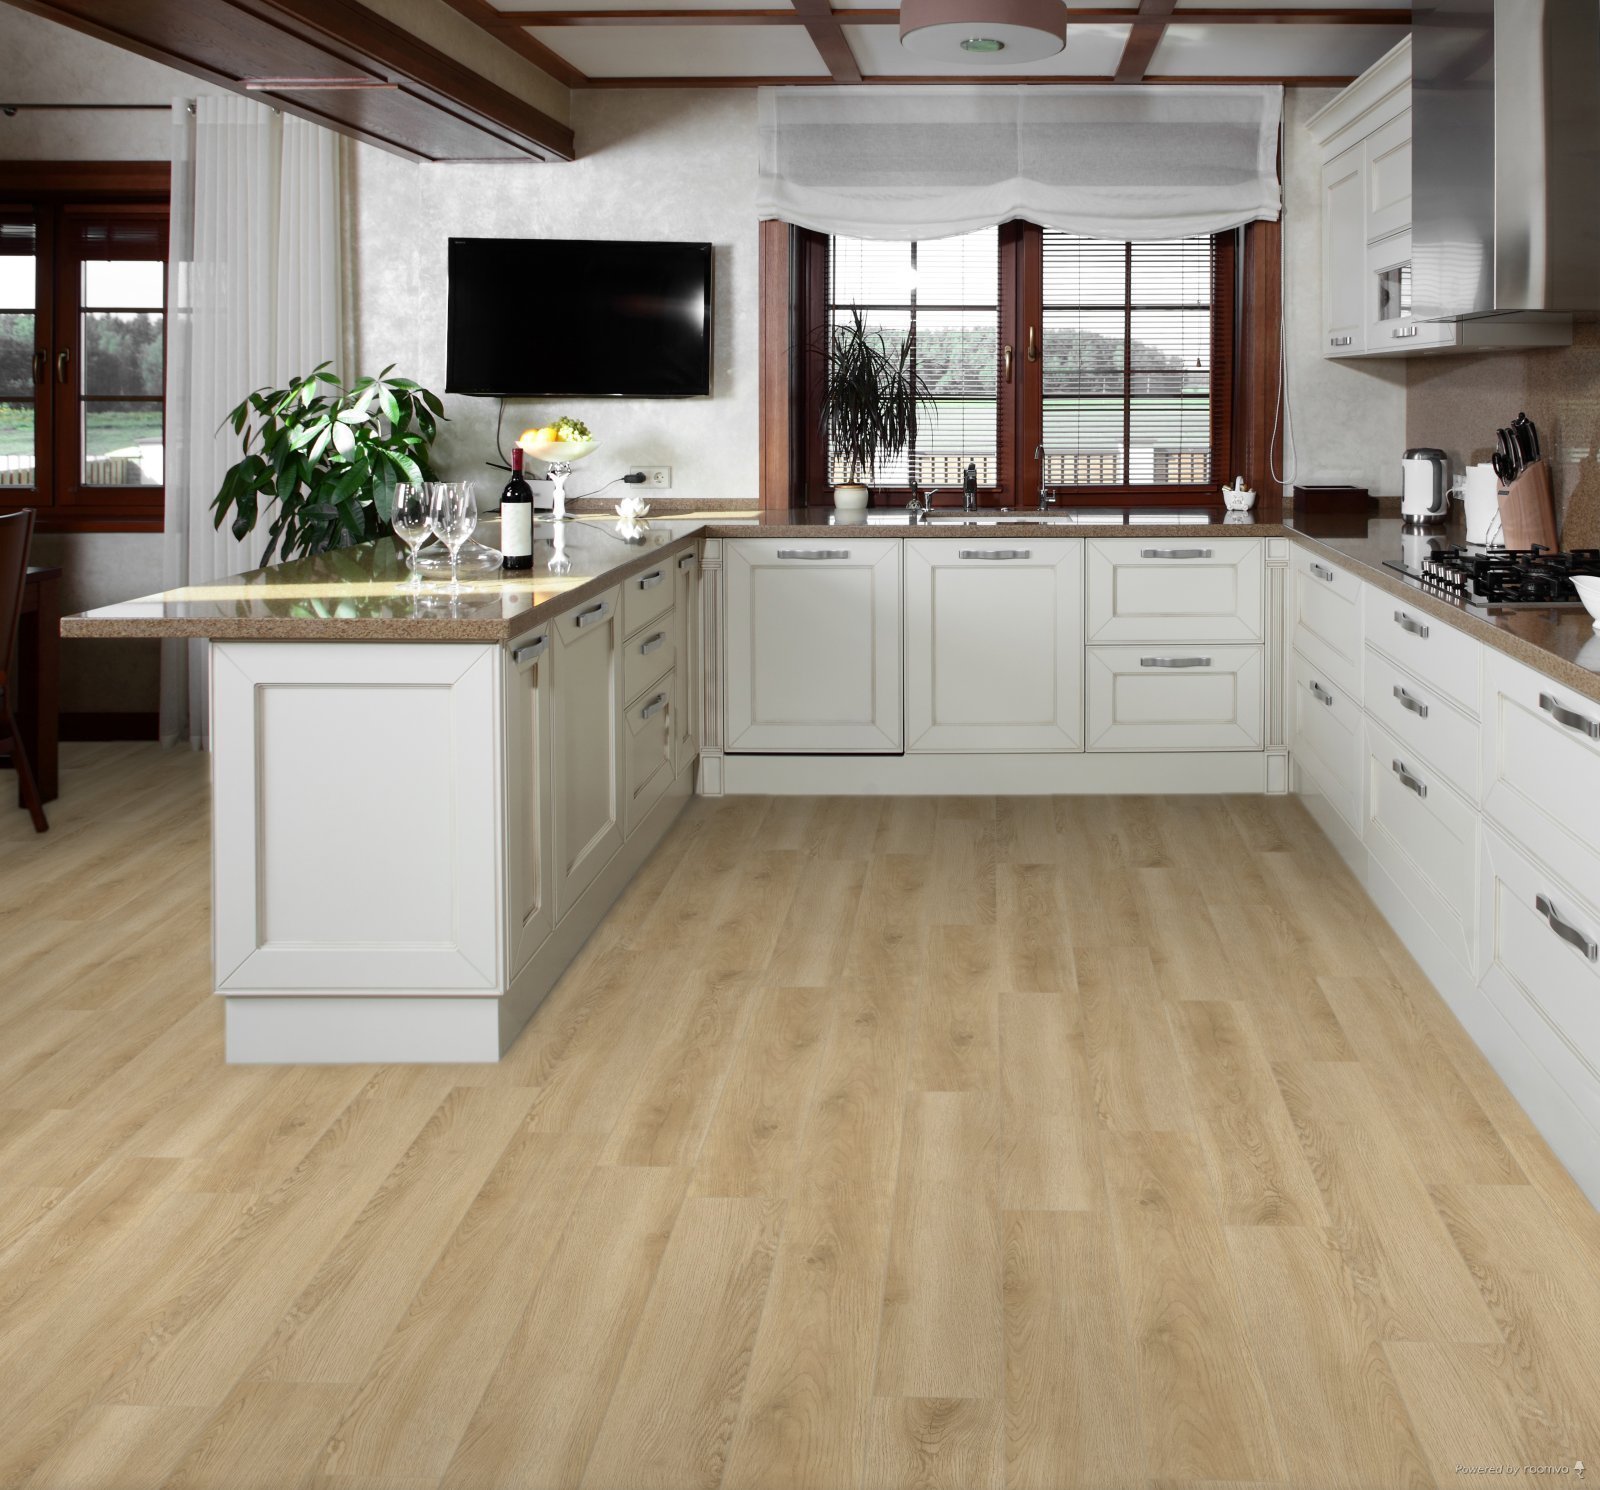 Horizen Flooring presents to you a picture of a quality wide plank Carmel luxury vinyl plank. NovoCore Q Merengue collection features a wide range of colors & designs that will compliment any interior. Natural wood grain synchronized surface allow for an authentic hardwood look & feel. This collection features a 0.3″ / 7.5 mm overall thickness and a durable 22 mil / 0.55 mm wear layer for residential and commercial applications.